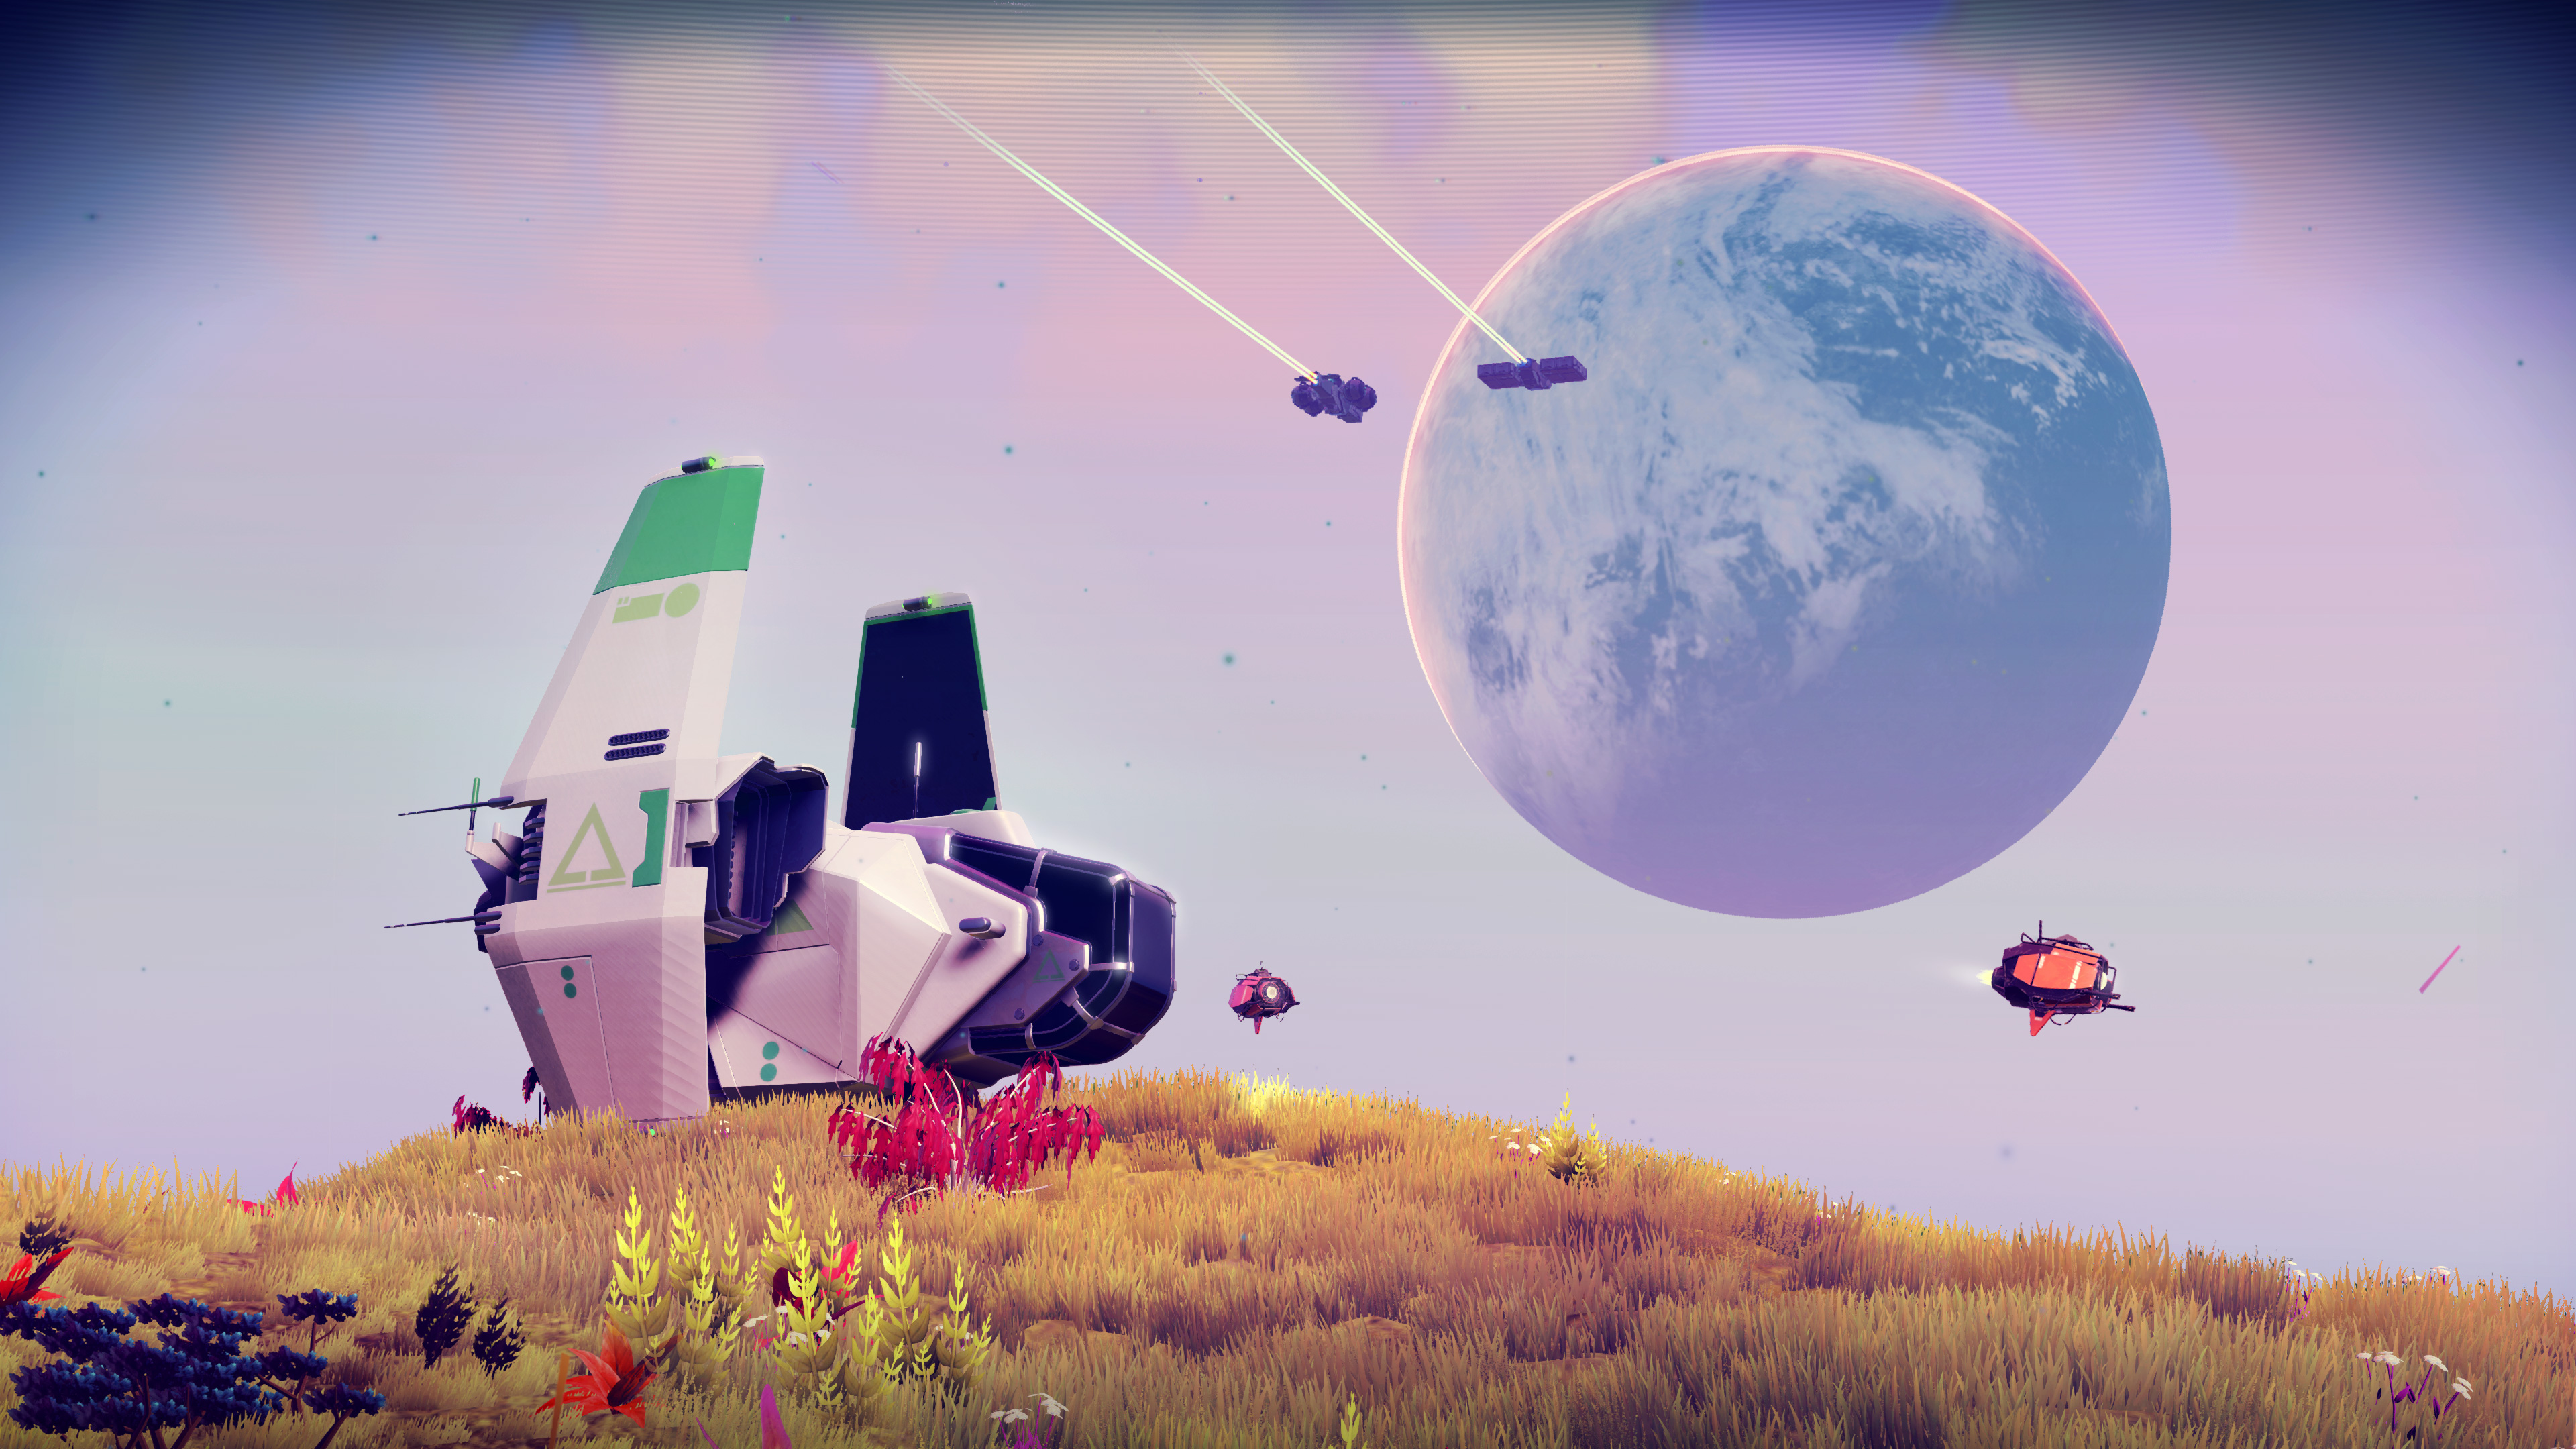 No Mans Sky 4k, HD Games, 4k Wallpapers, Images, Backgrounds, Photos